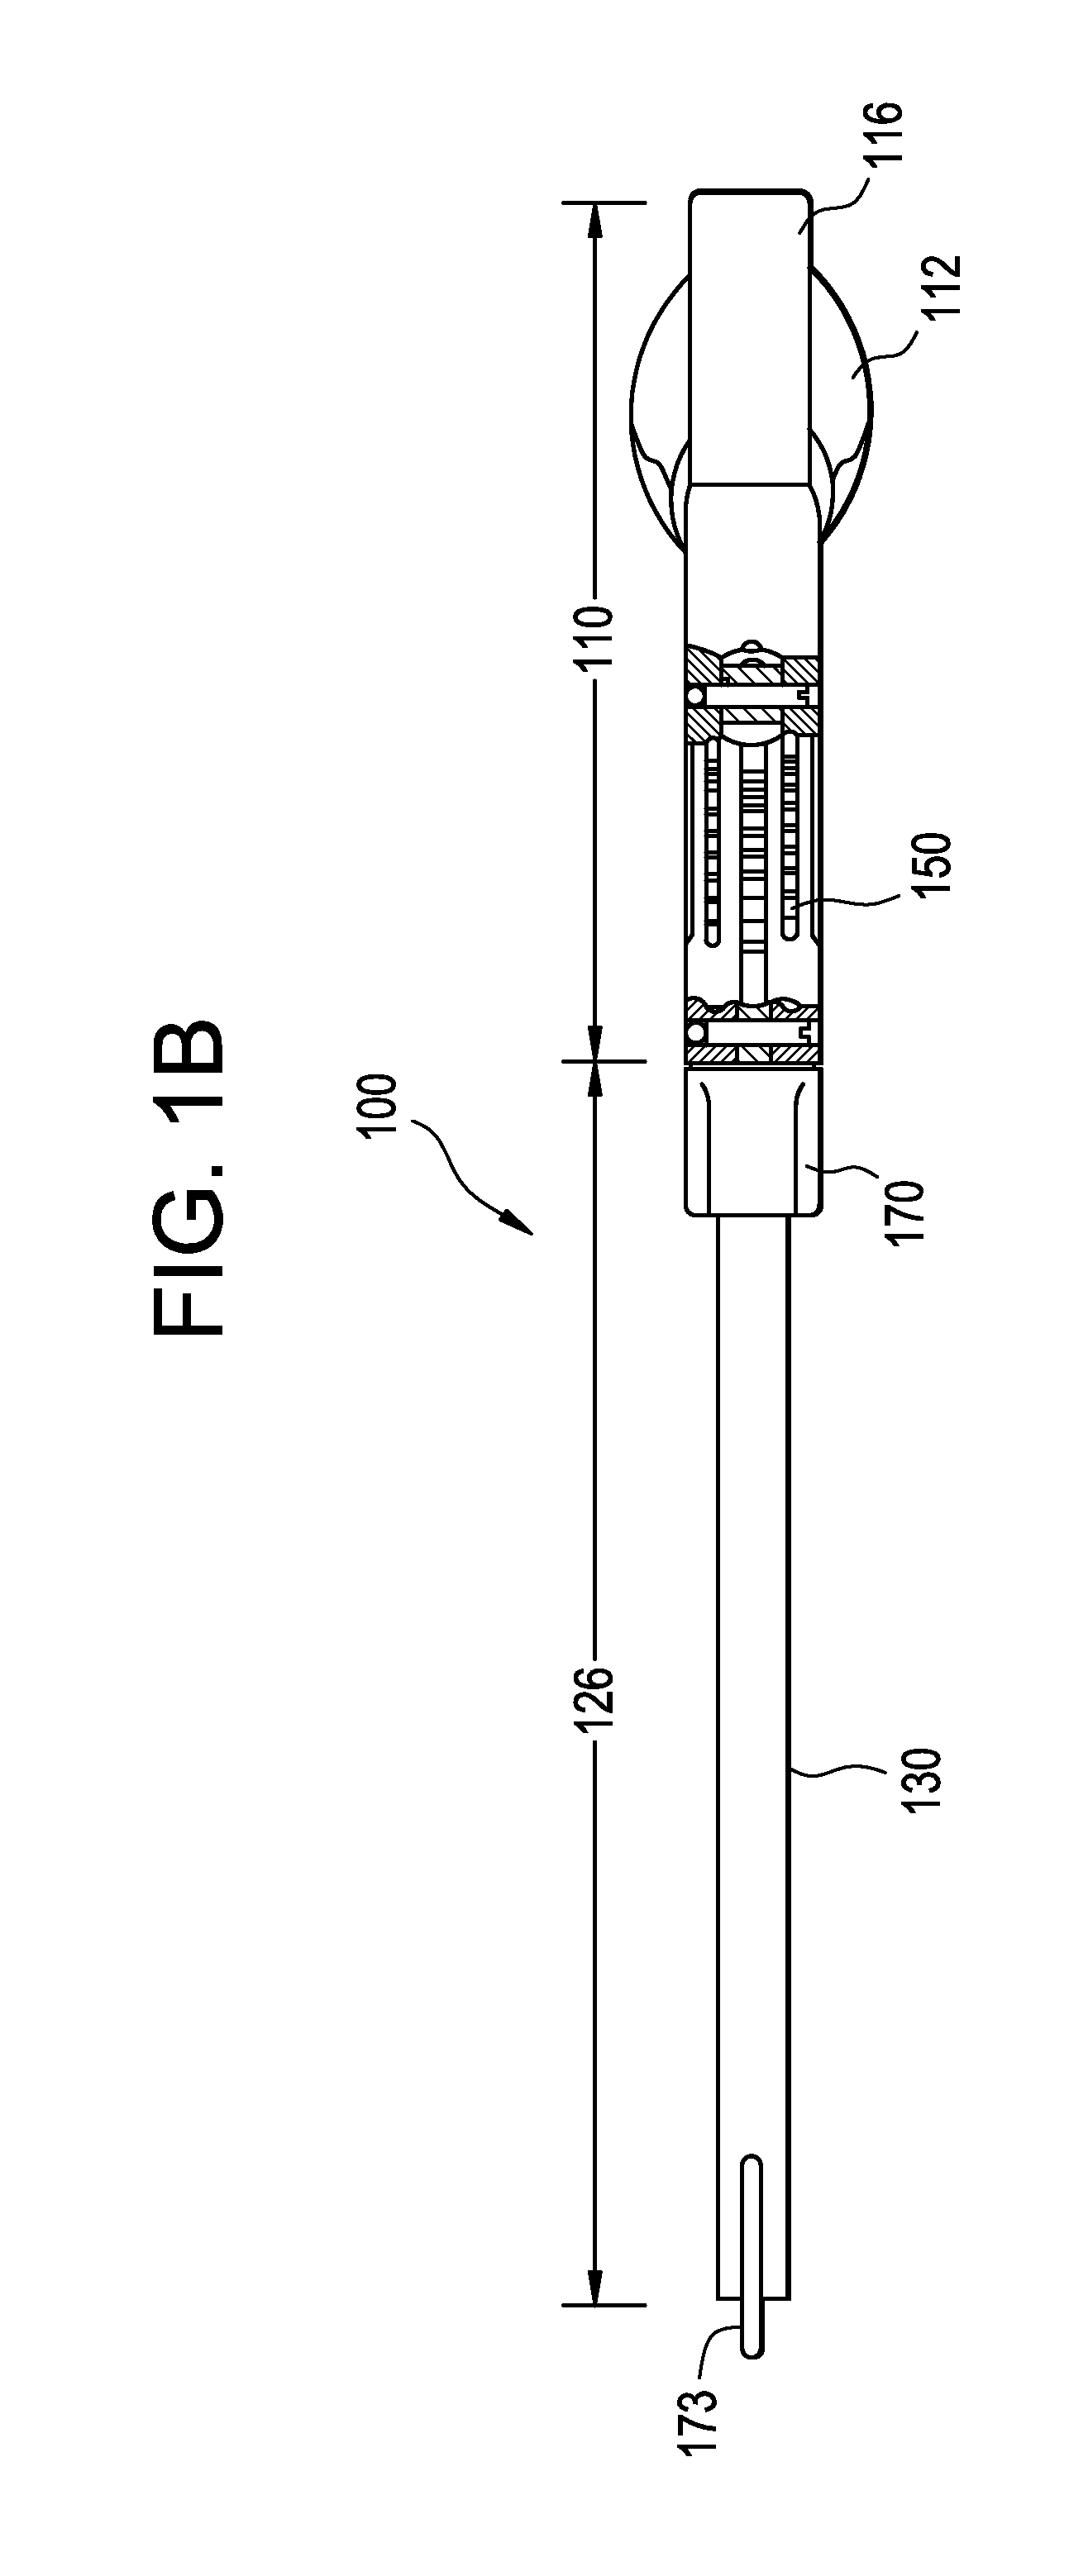 Novel Implant Inserter Having a Laterally-Extending Dovetail Engagement Feature